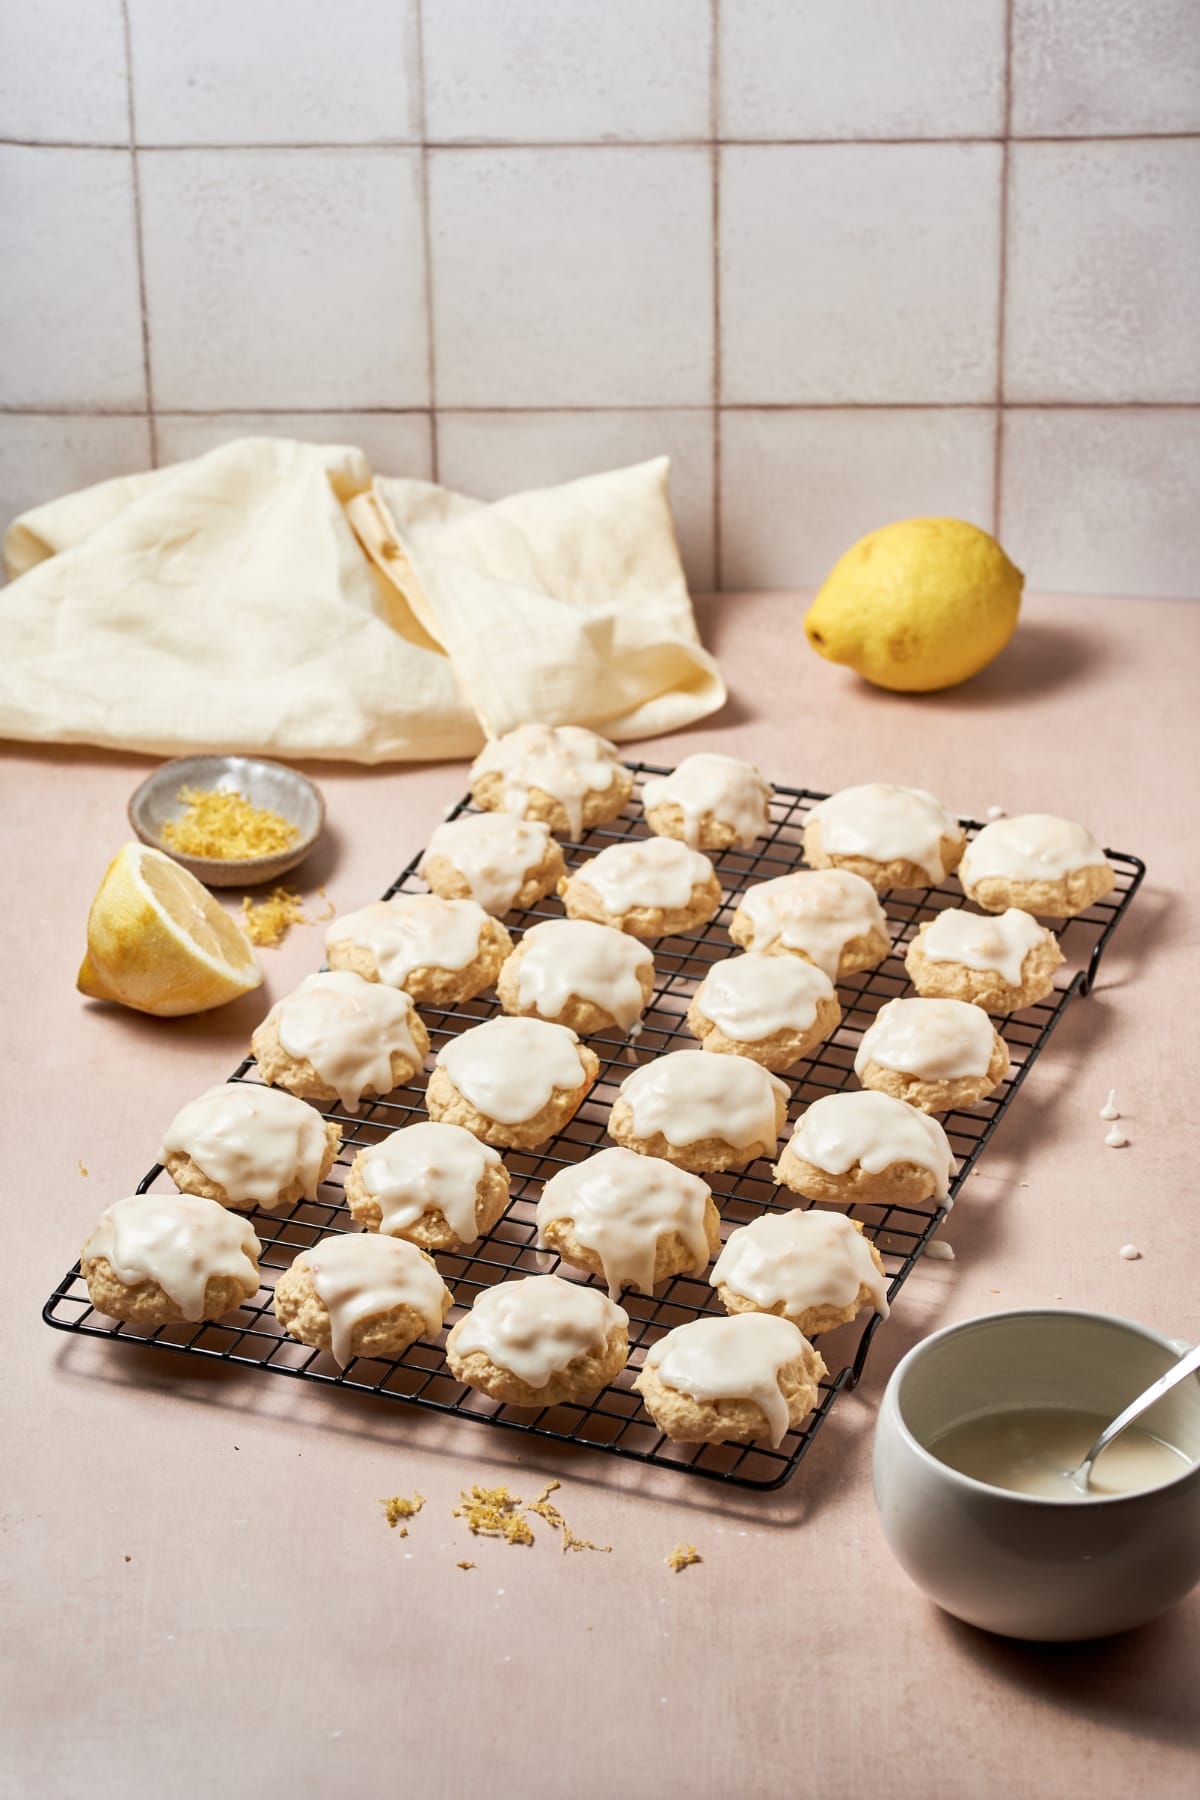 Frosted ricotta cookies on a baking wire next to half of lemon.